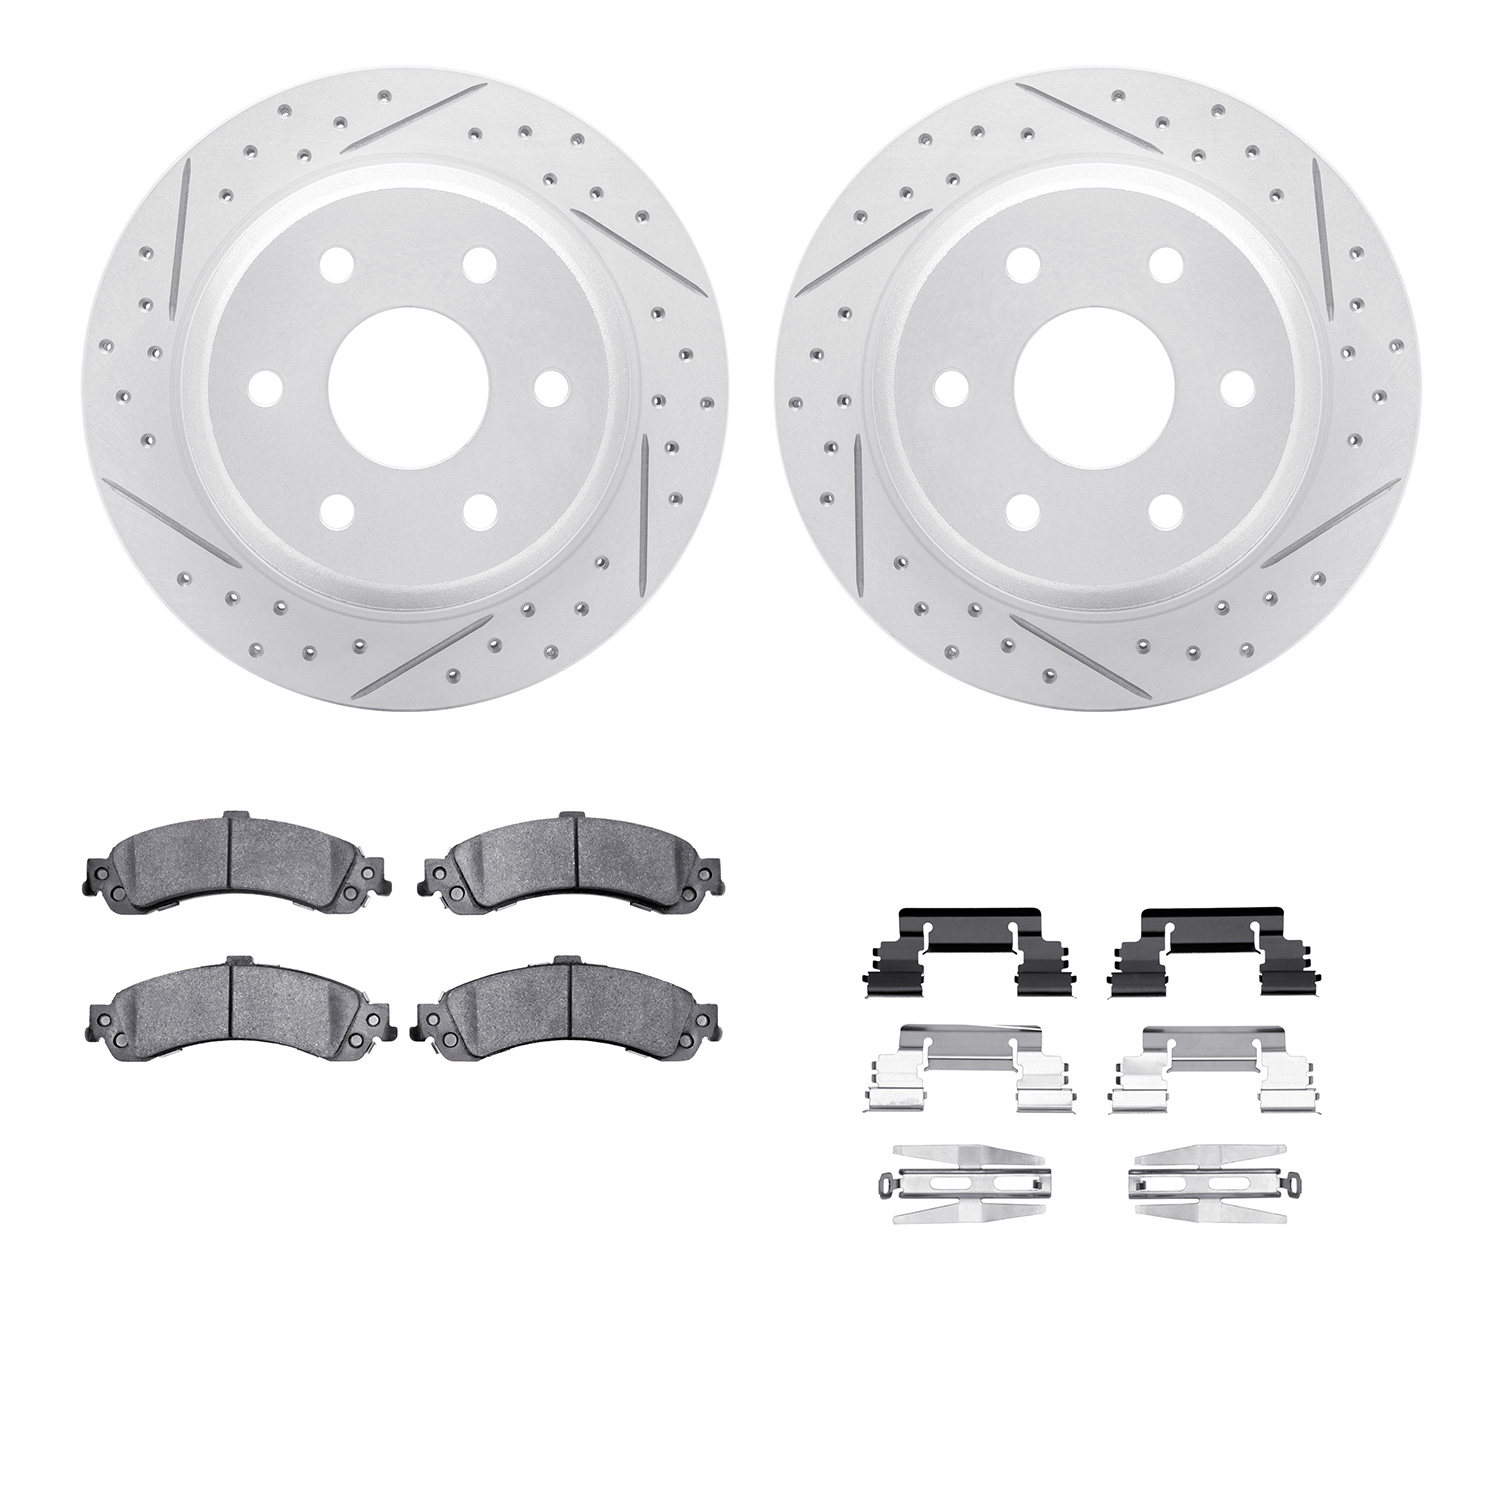 2512-48044 Geoperformance Drilled/Slotted Rotors w/5000 Advanced Brake Pads Kit & Hardware, 2000-2006 GM, Position: Rear